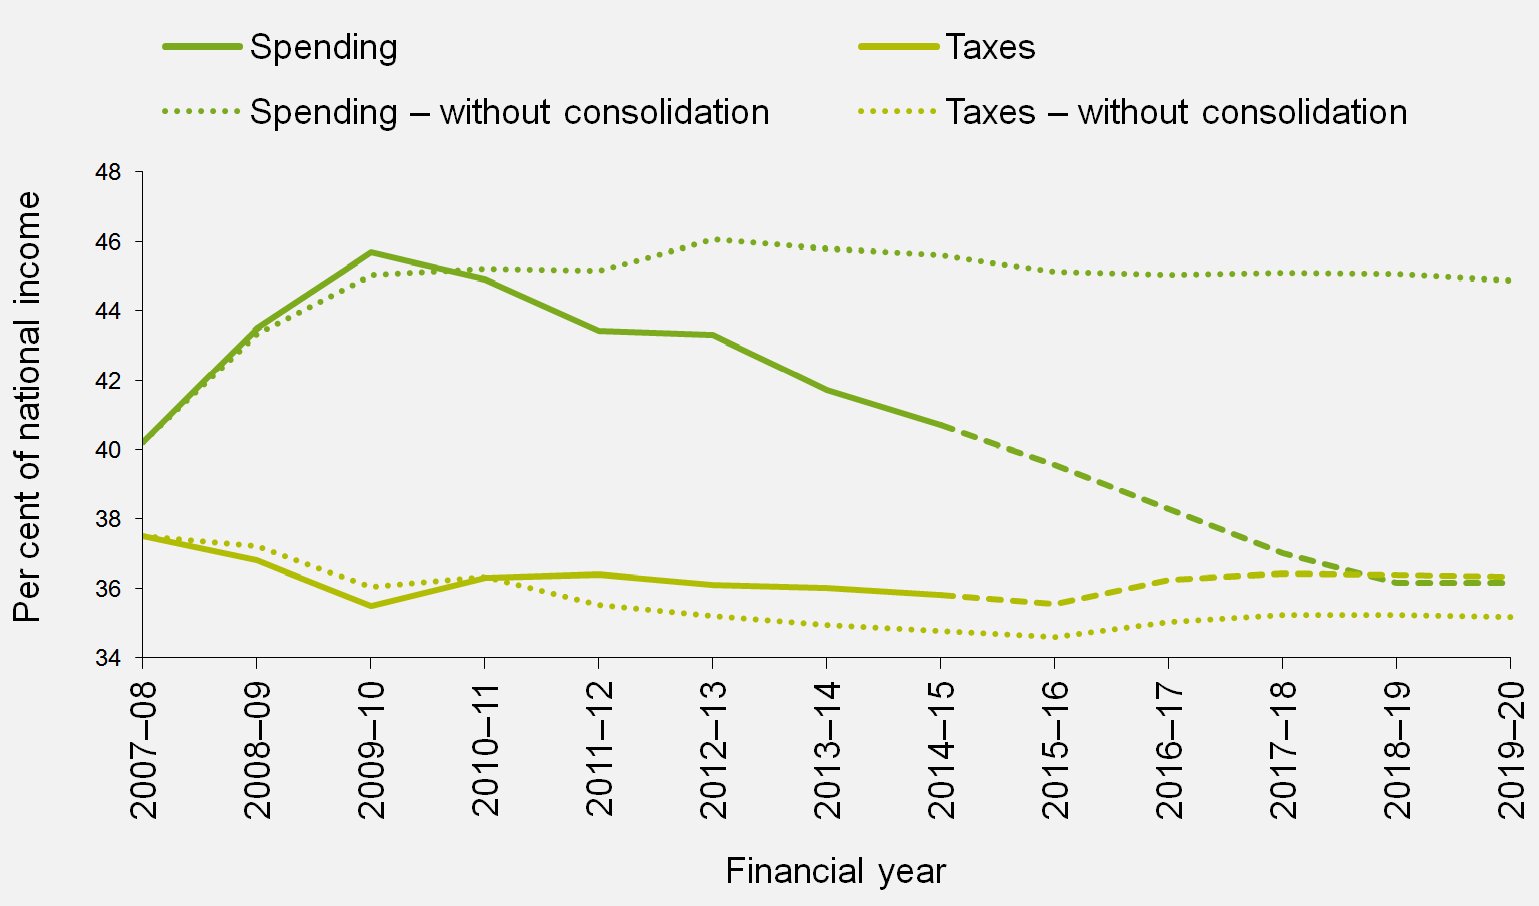 Taxes and spending as a share of national income, with and without fiscal consolidation